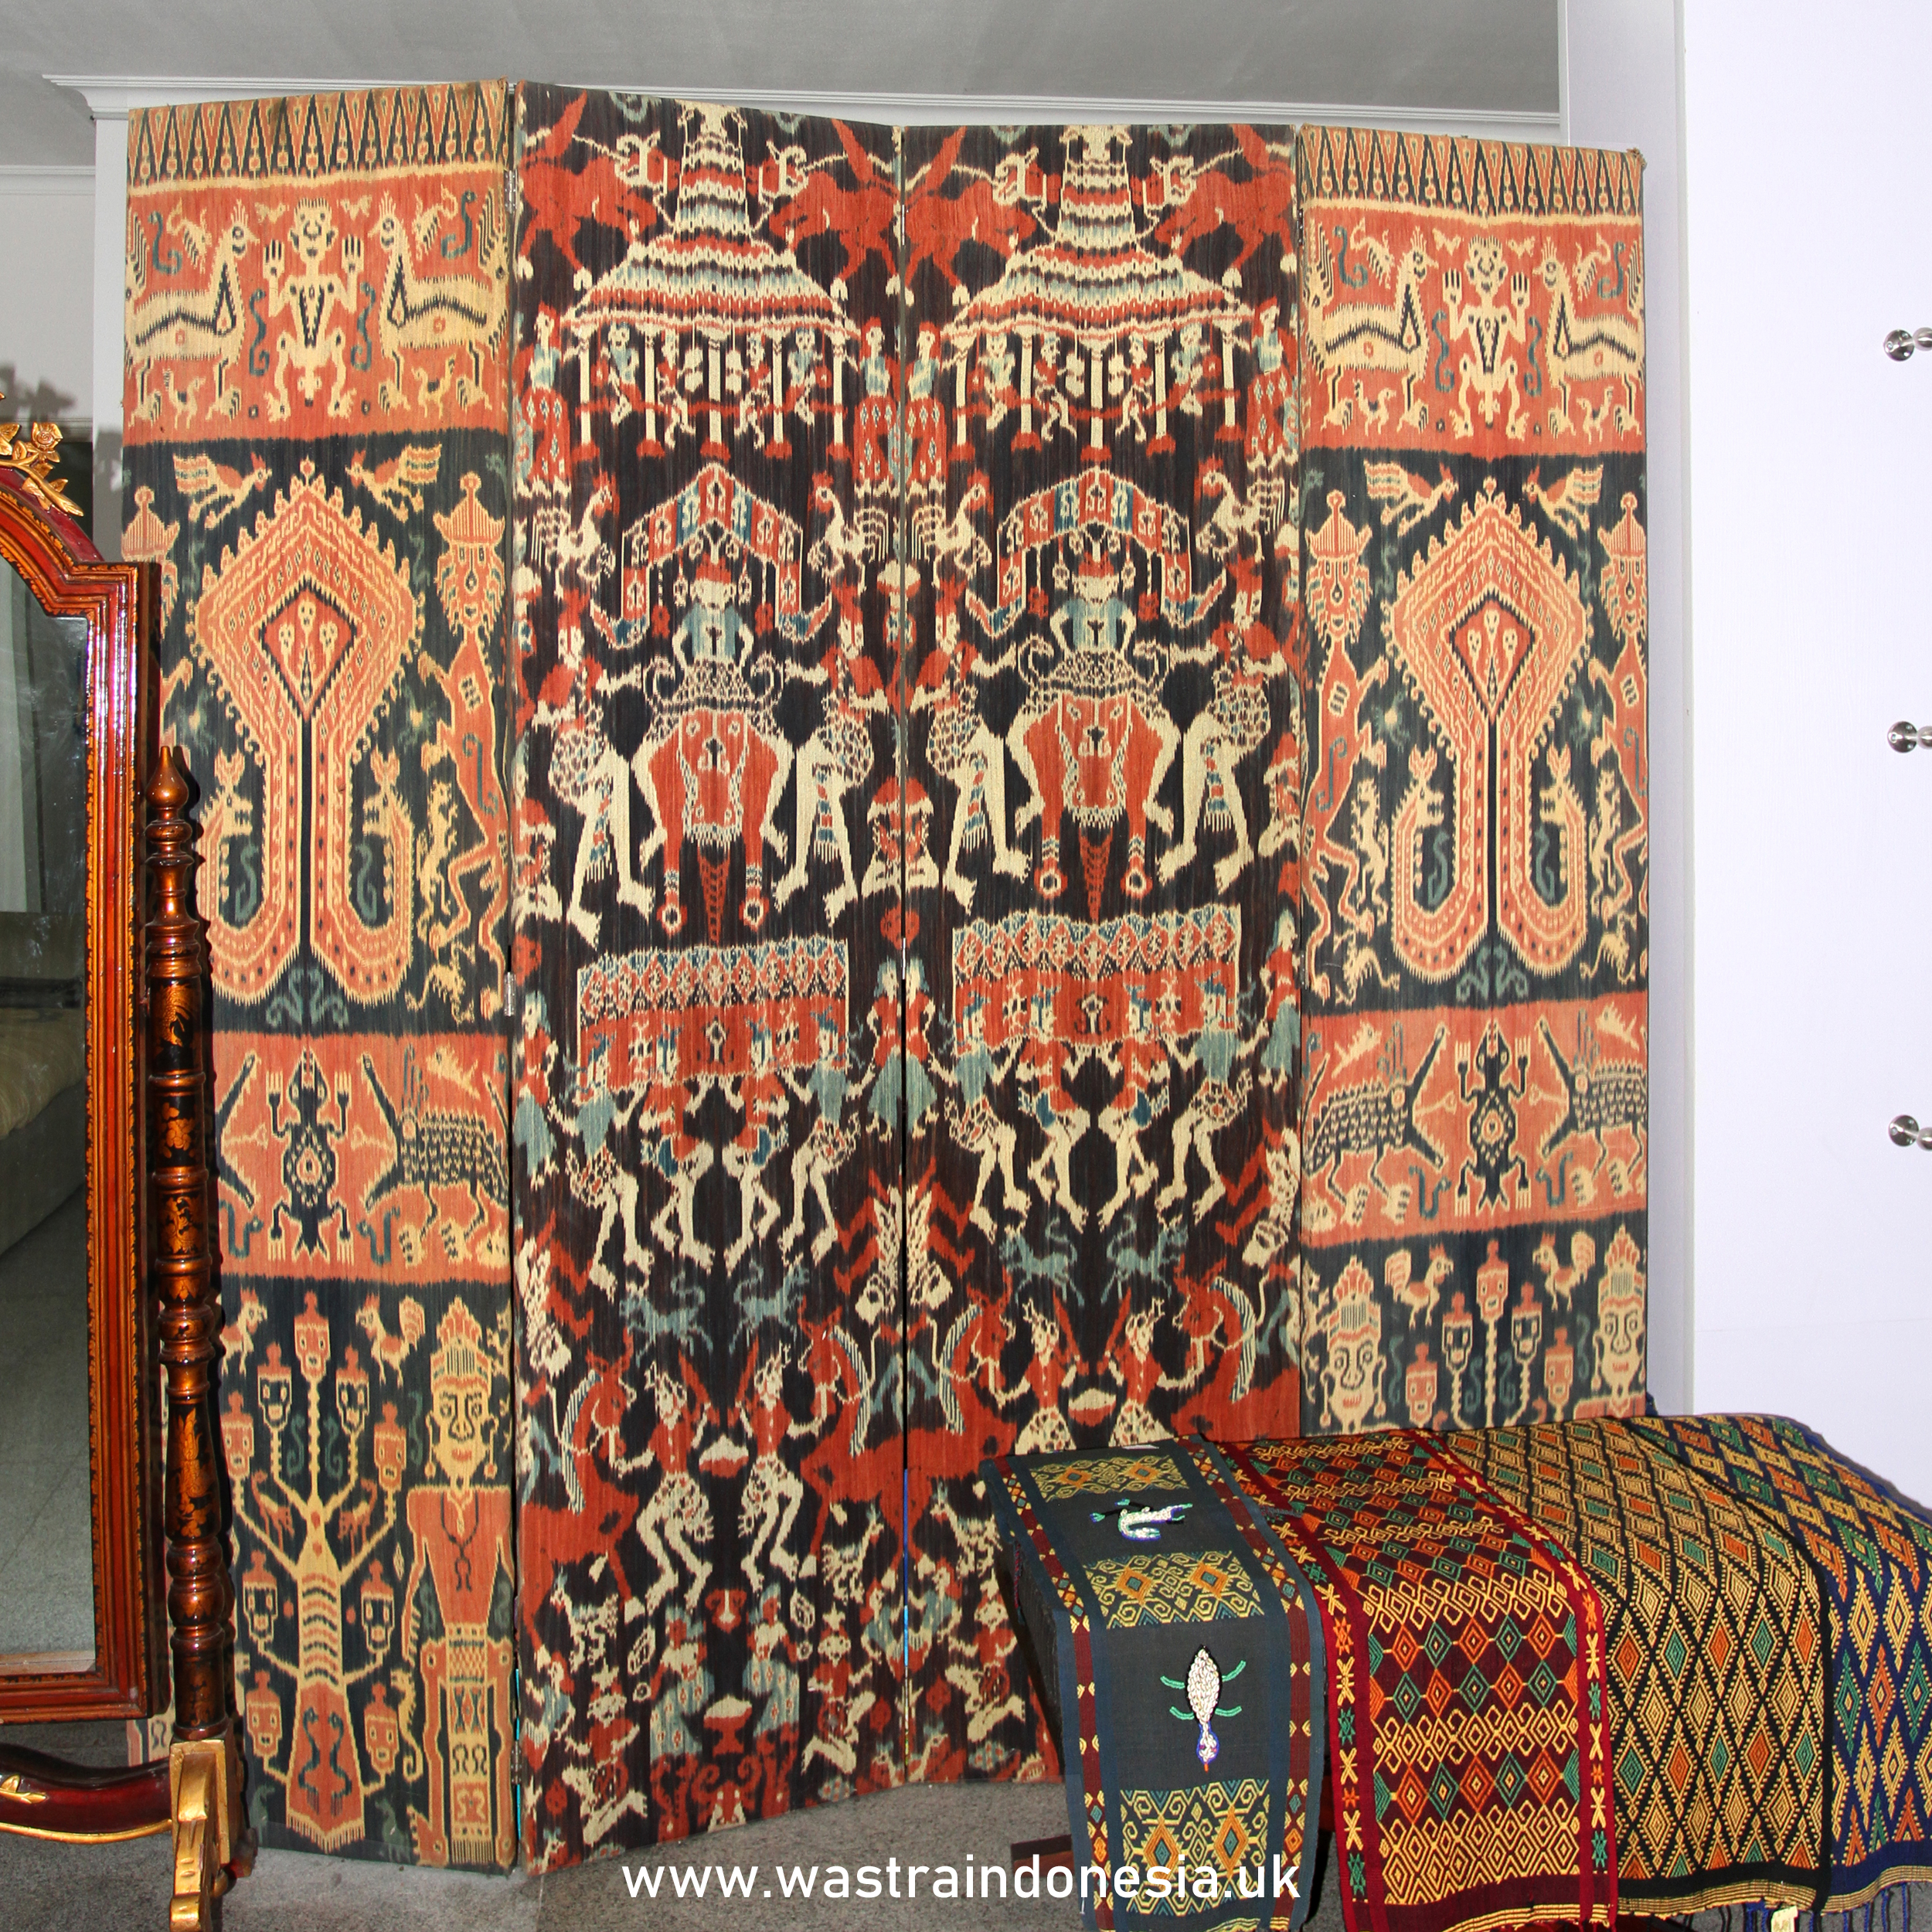 MAGNIFICENT EAST SUMBA TEXTILES FOR OUR HOMES